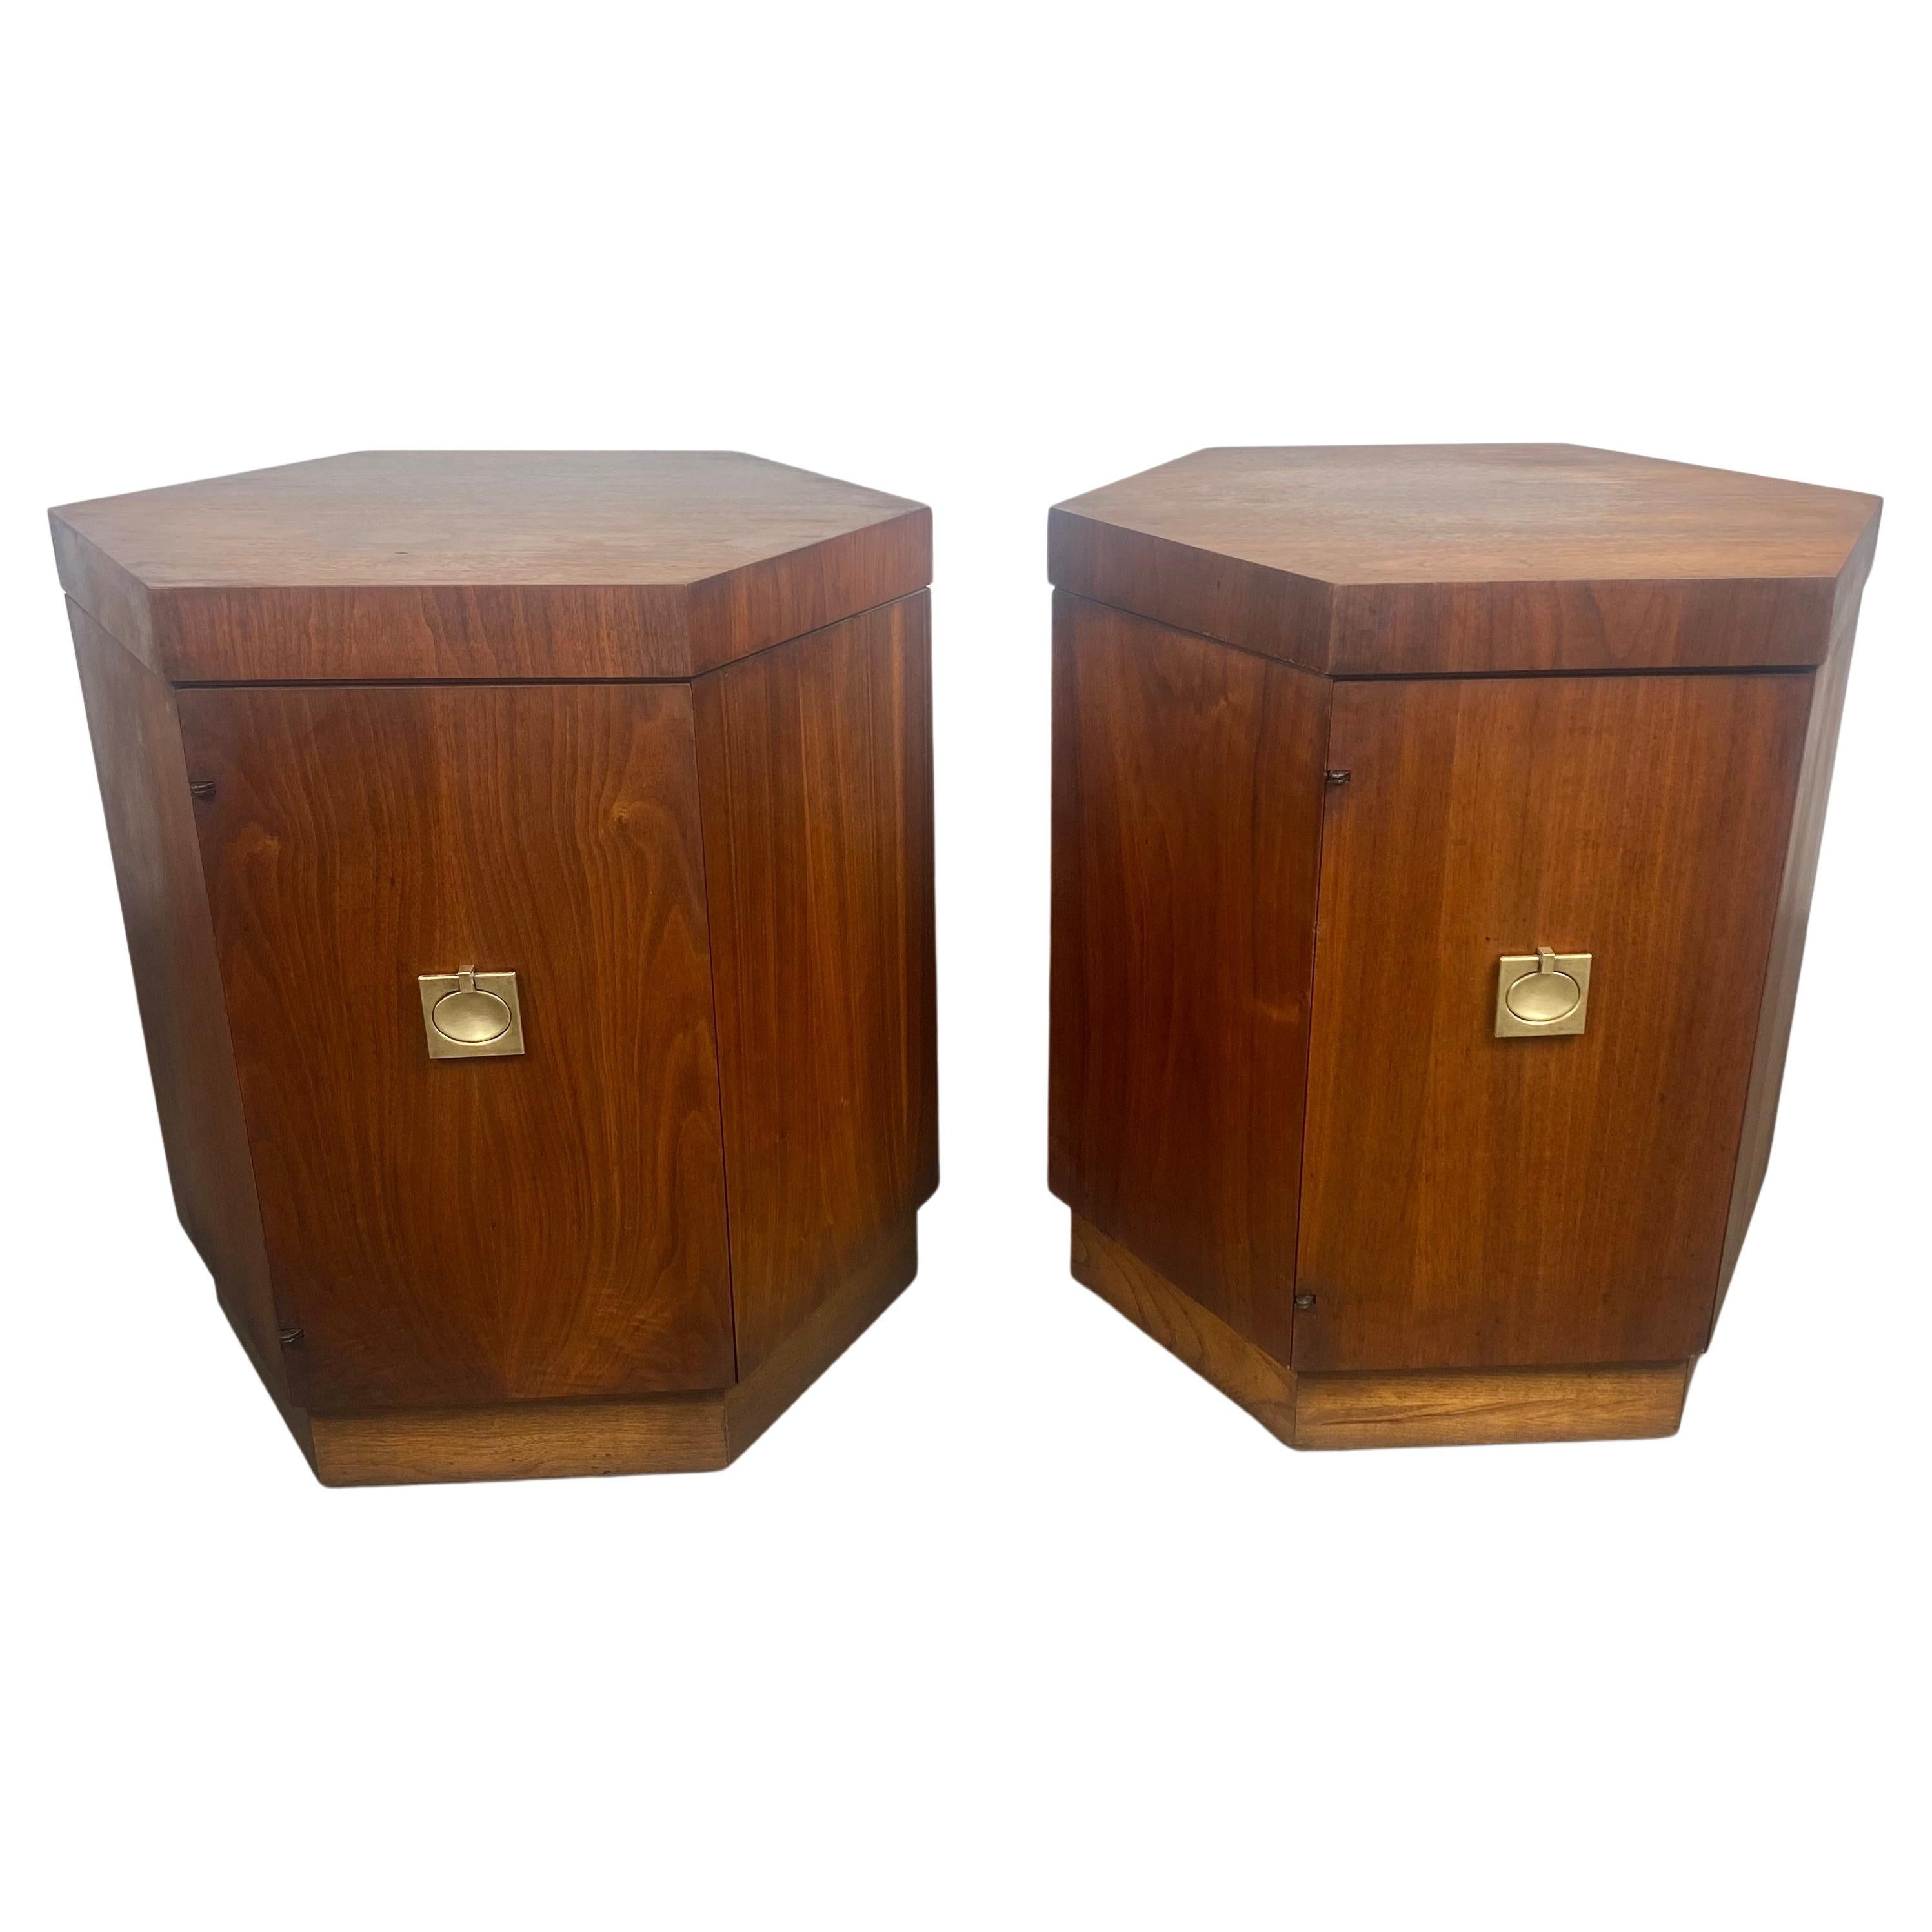 Stunning Pair Hexagon Tables / Stands, , Harvey Probber Style made by Lane